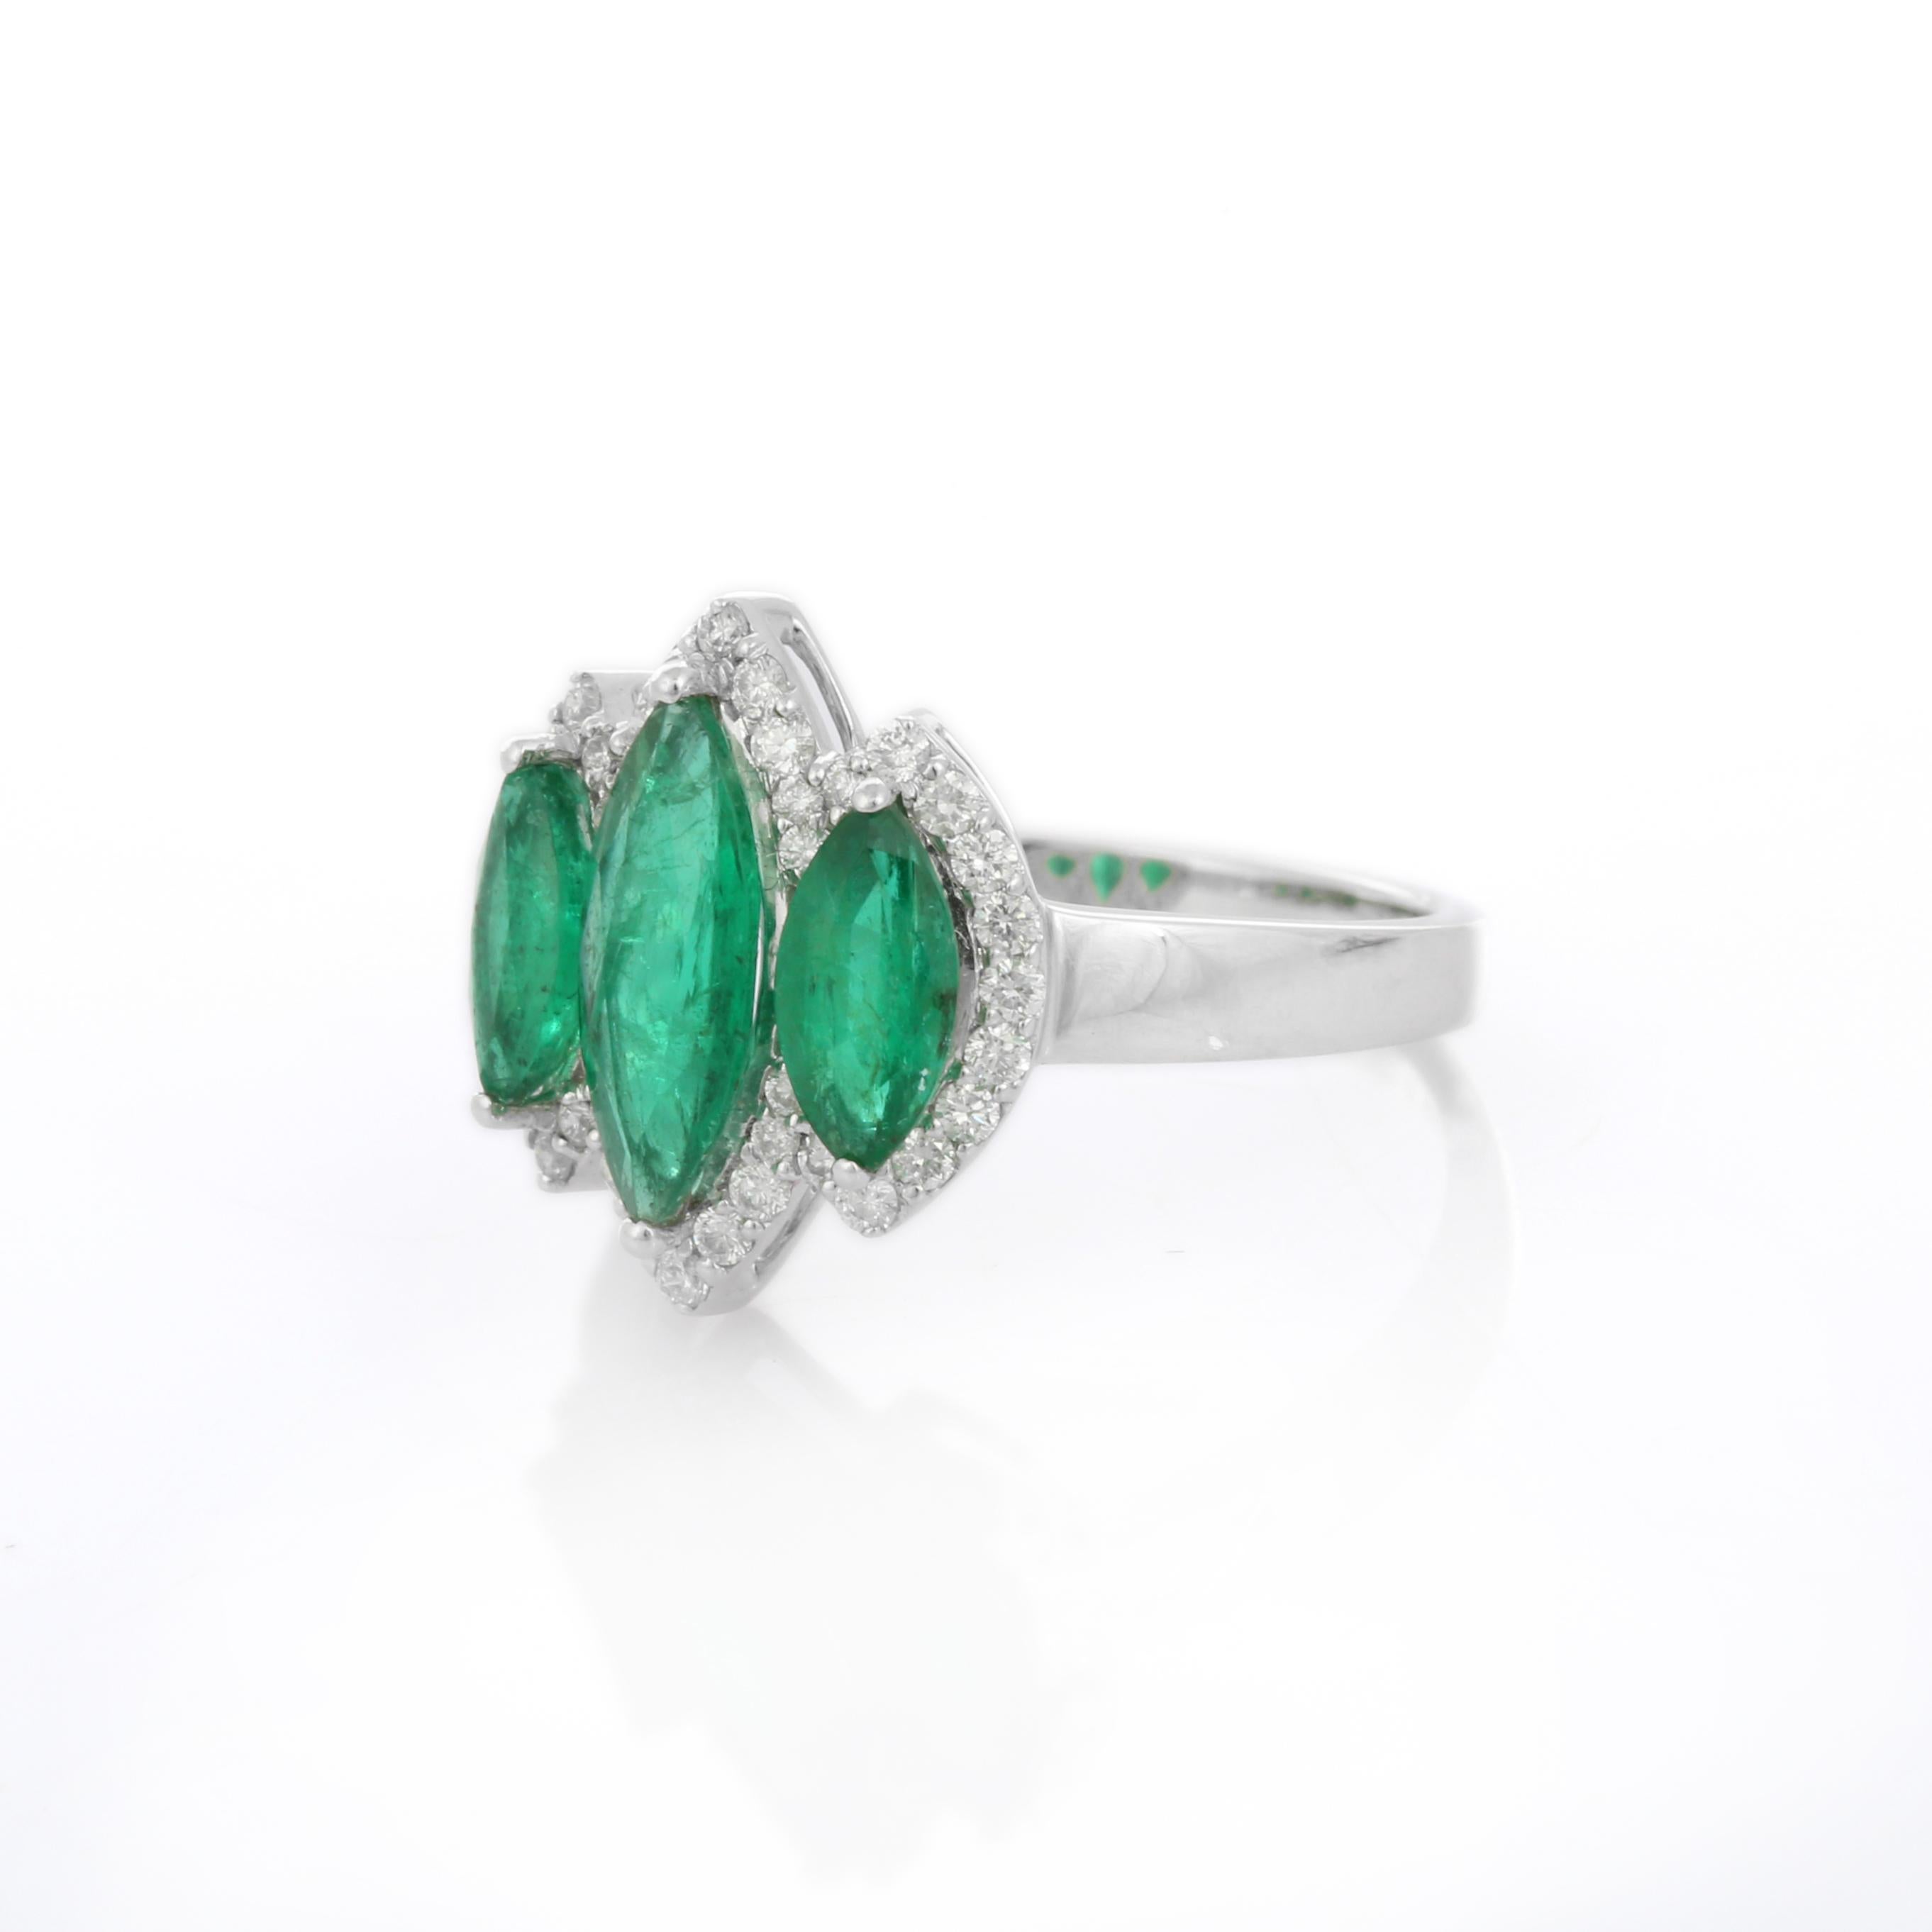 For Sale:  1.88 Carat Emerald Three Stone Ring with Diamonds in 18K White Gold 3